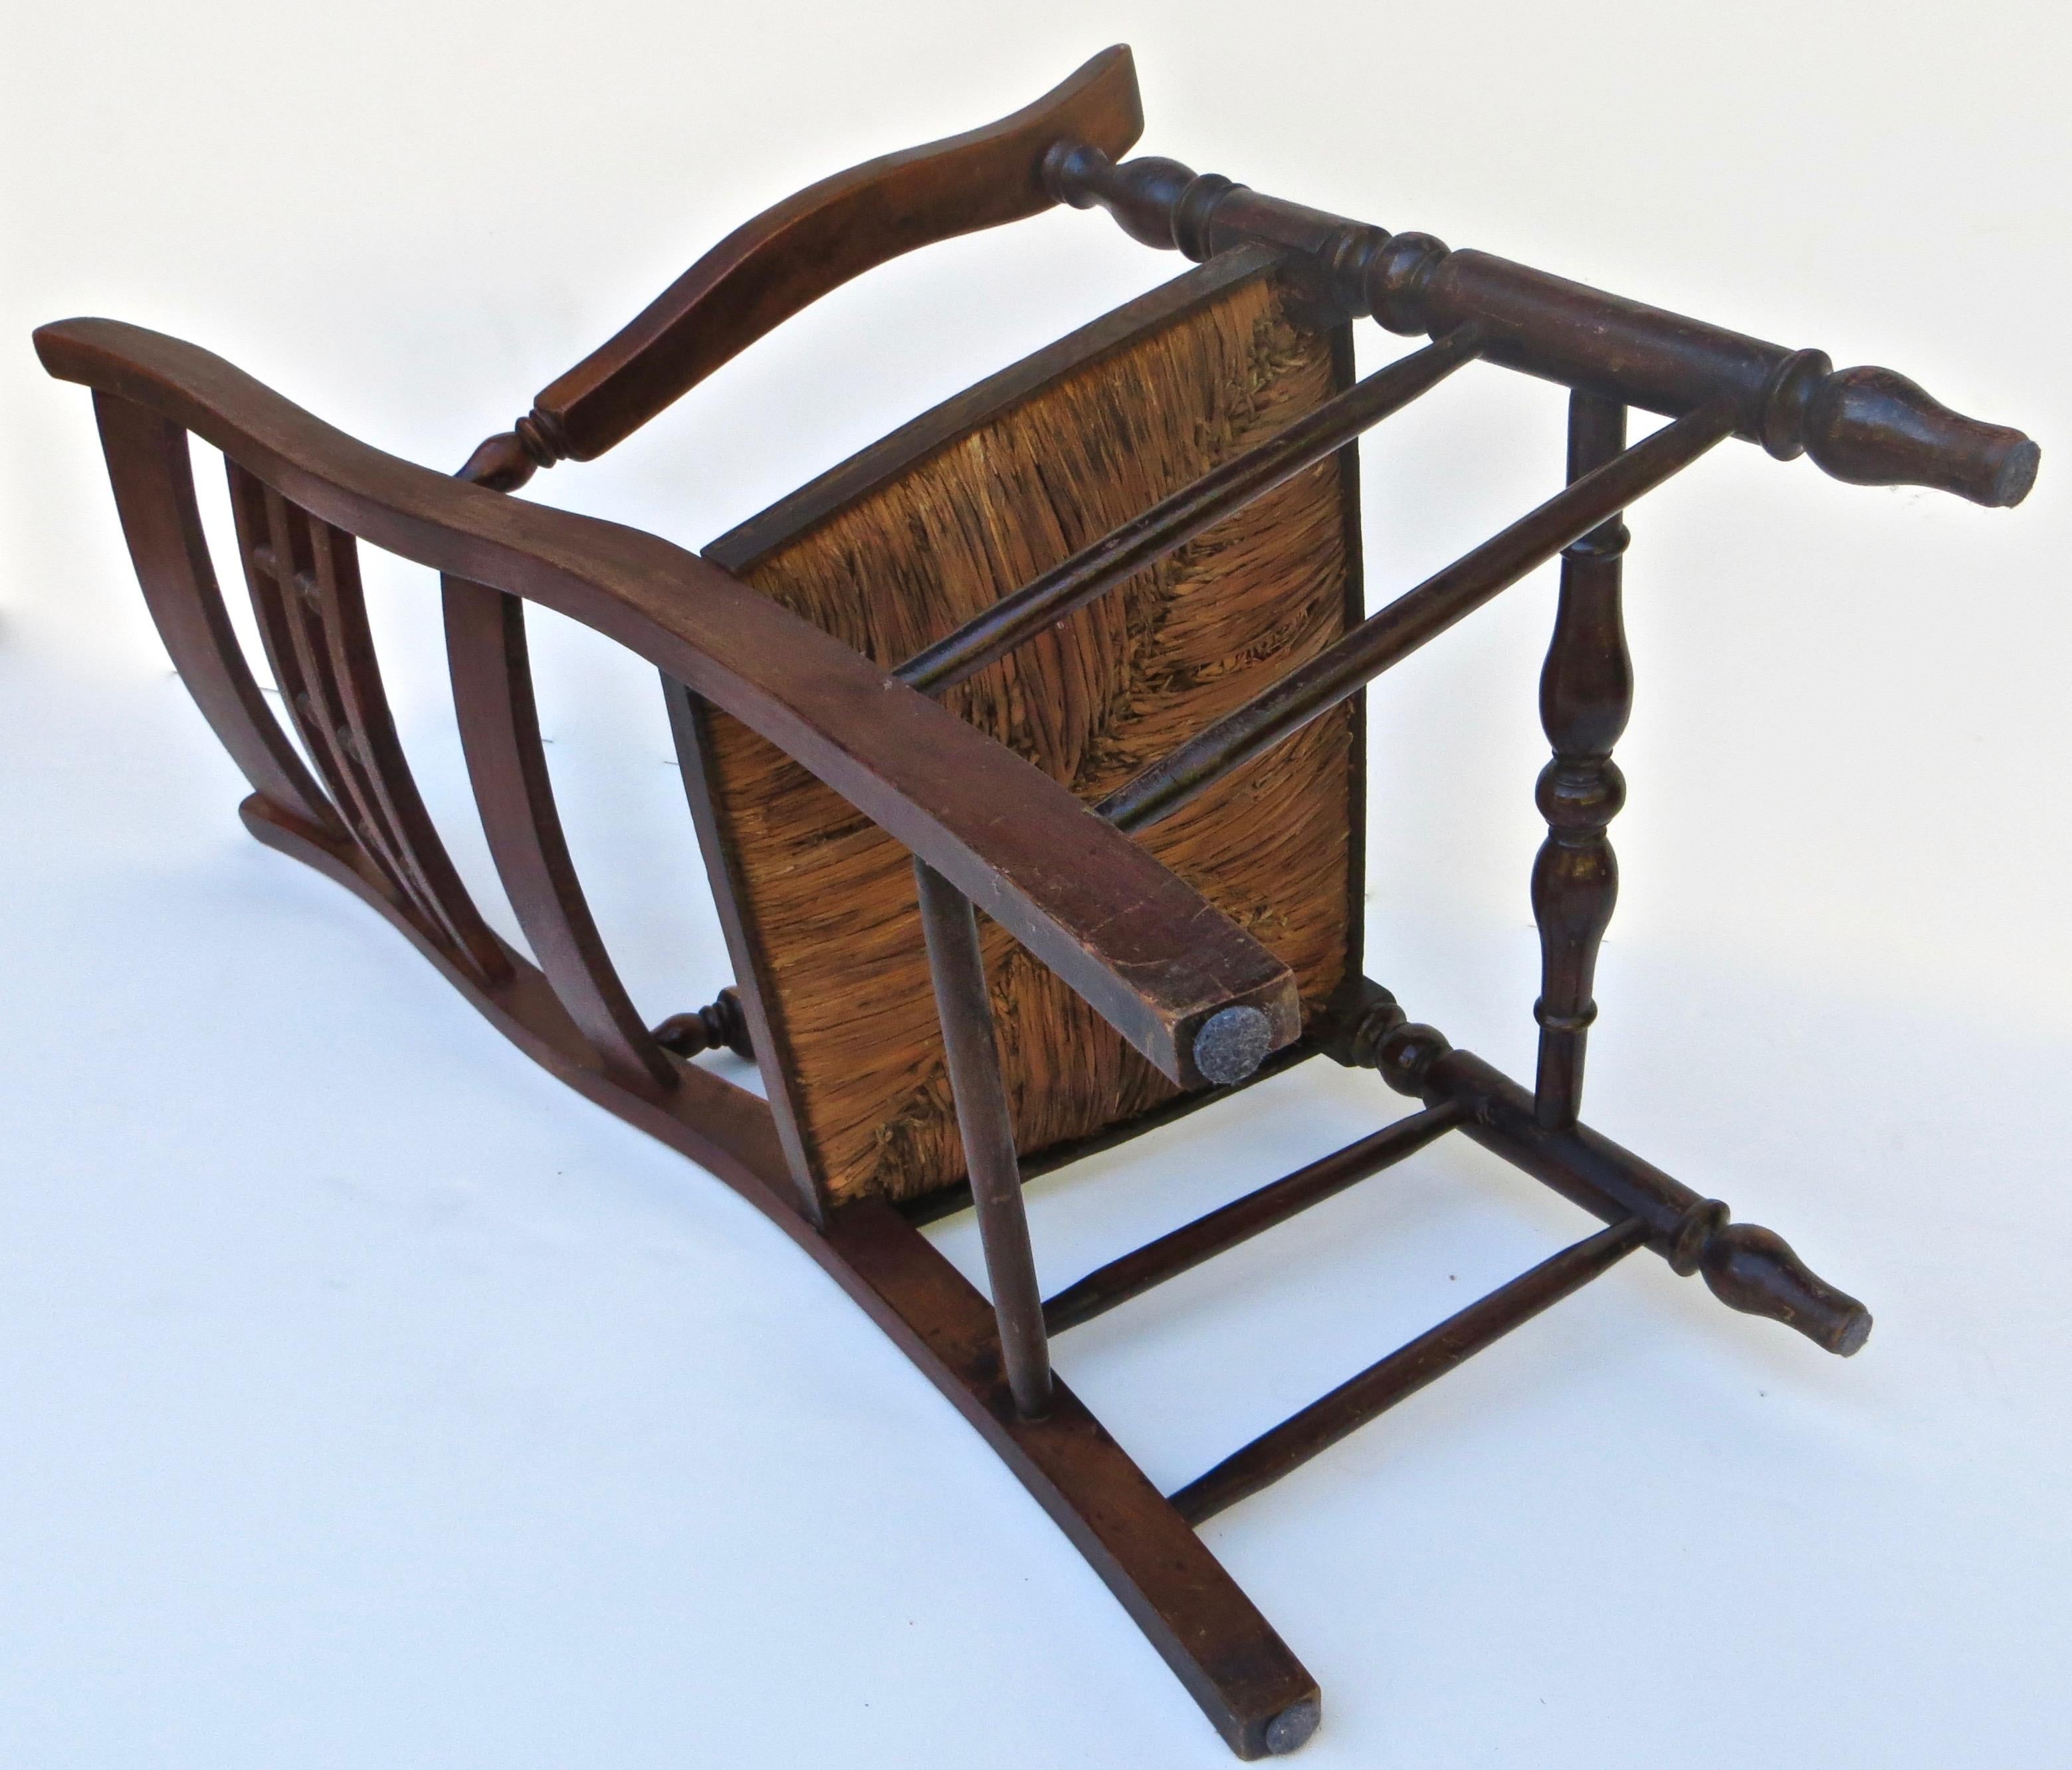 Hand-Carved Mid 19th C. Rush Seated Ladder Back Chair. English, circa 1850 For Sale